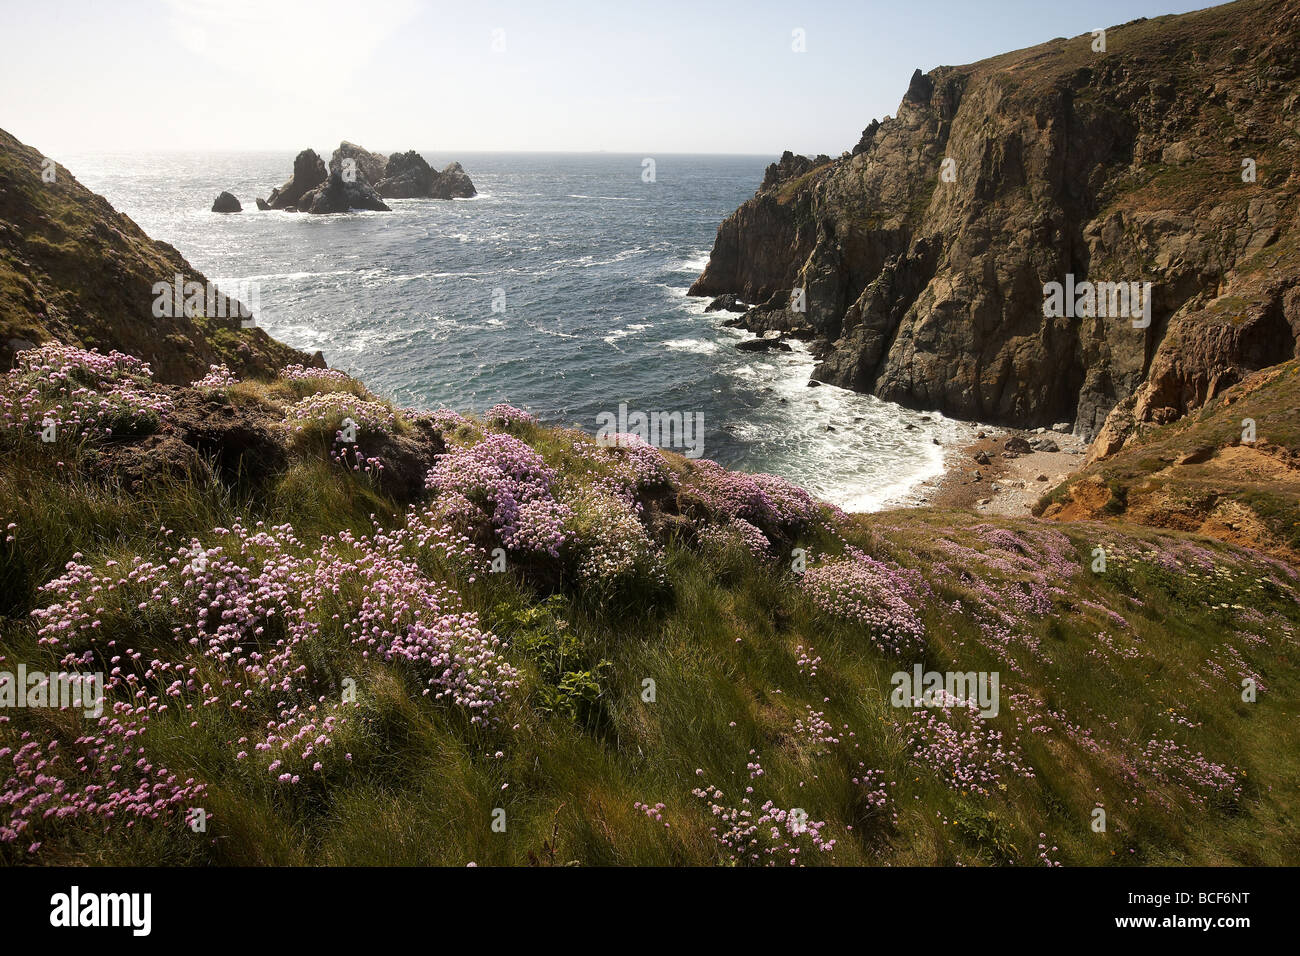 Wild flowers carpet the clifftops on the Alderney coast looking over Trois Vaux Bay Stock Photo